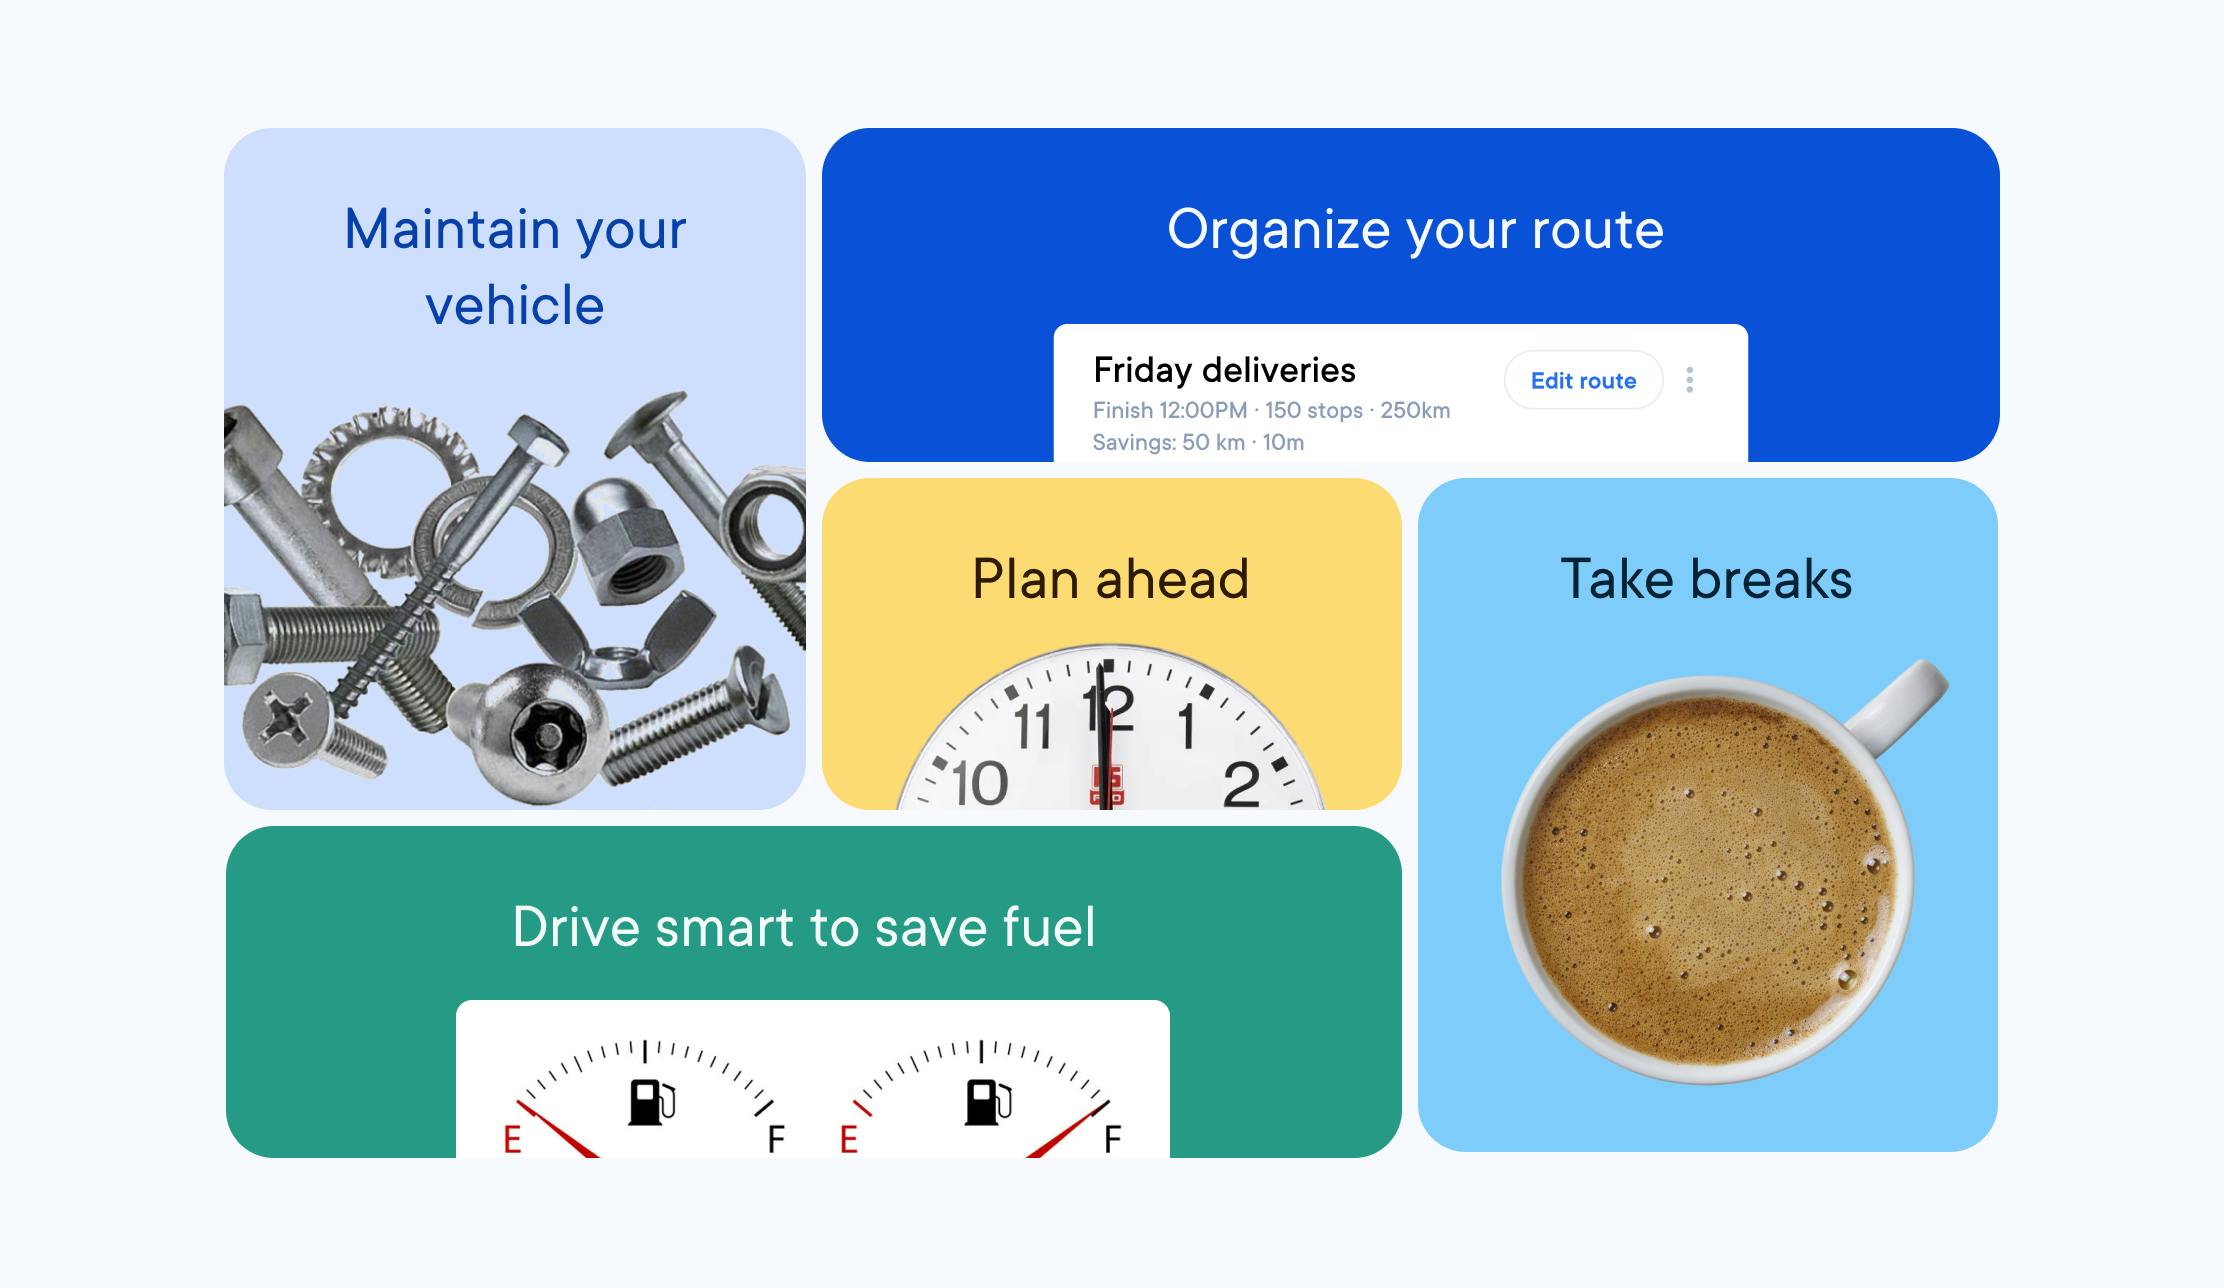 A group of smaller images that describe the obstacles of being a delivery driver. In order: maintain your vehicle, organize your route, plan ahead, drive smart to save fuel, take breaks.